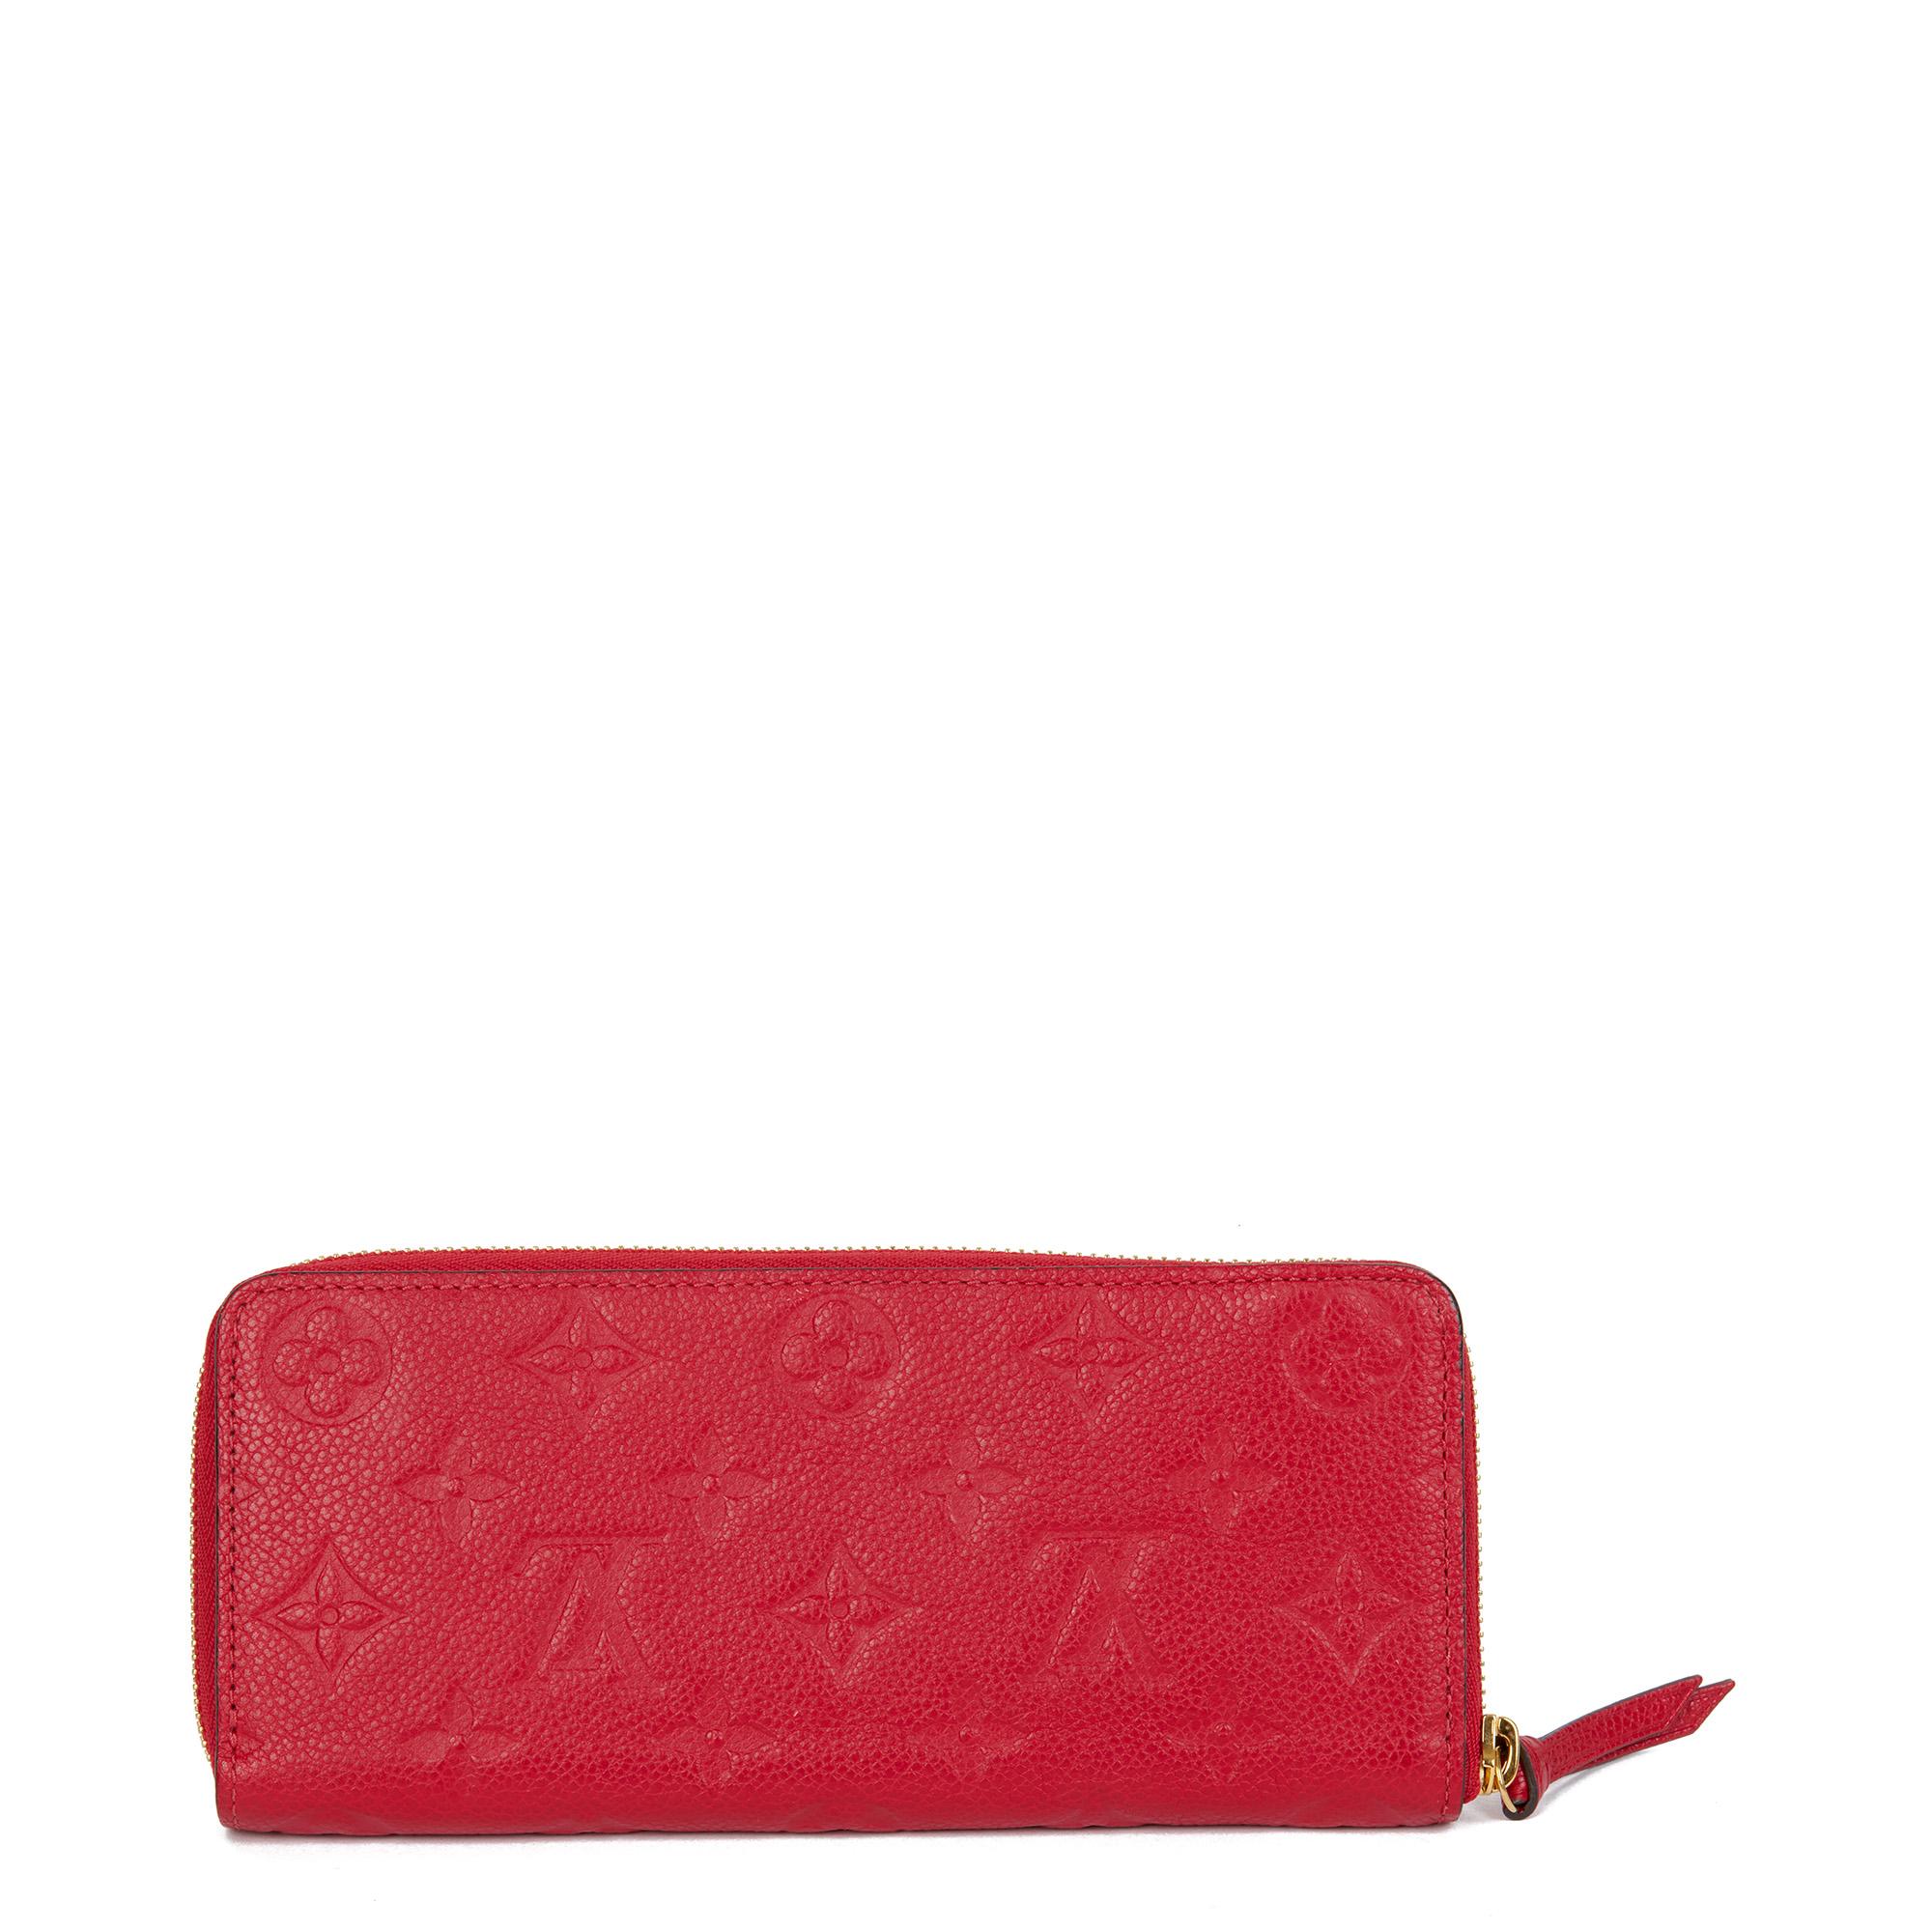 Louis Vuitton SCARLET MONOGRAM EMPREINTE LEATHER CLÉMENCE WALLET

CONDITION NOTES
The exterior is in exceptional condition with minimal signs of use.
The interior is in exceptional condition with minimal signs of use.
The hardware is in exceptional